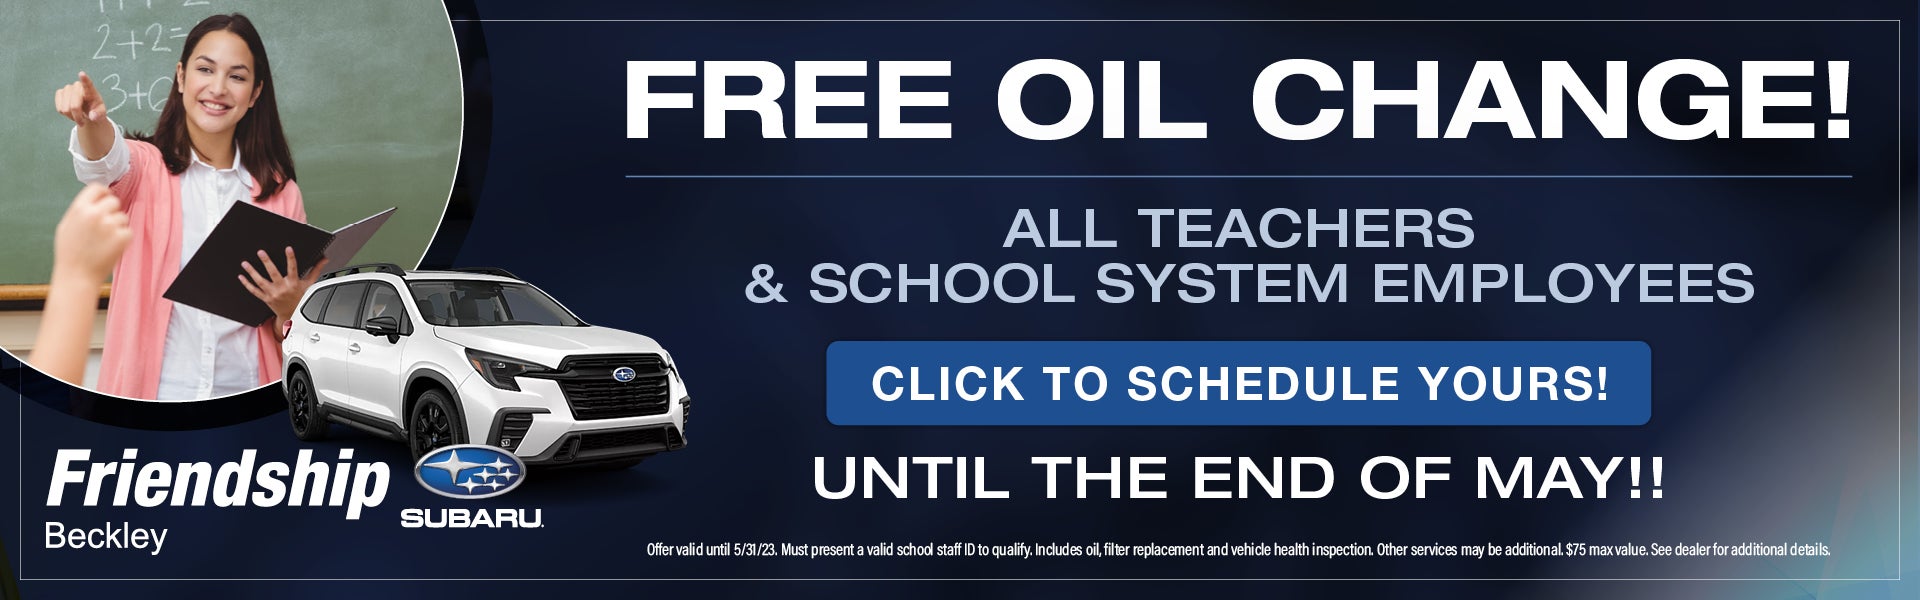 Schedule Your Free Oil Change Today!